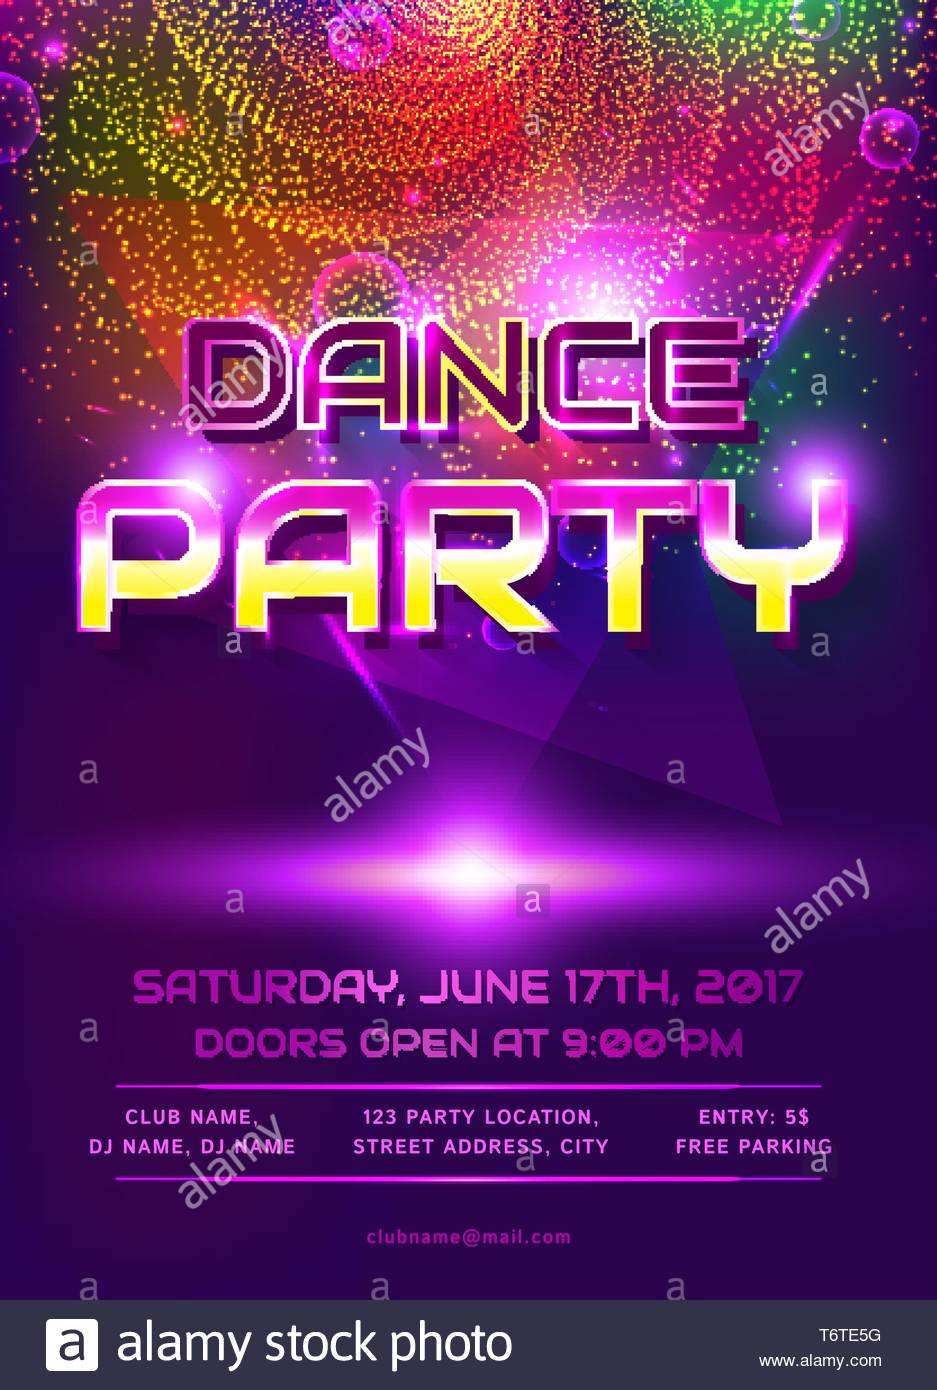 Colorful Flyer For Dance Party Invitation Template With Shiny within dimensions 937 X 1390